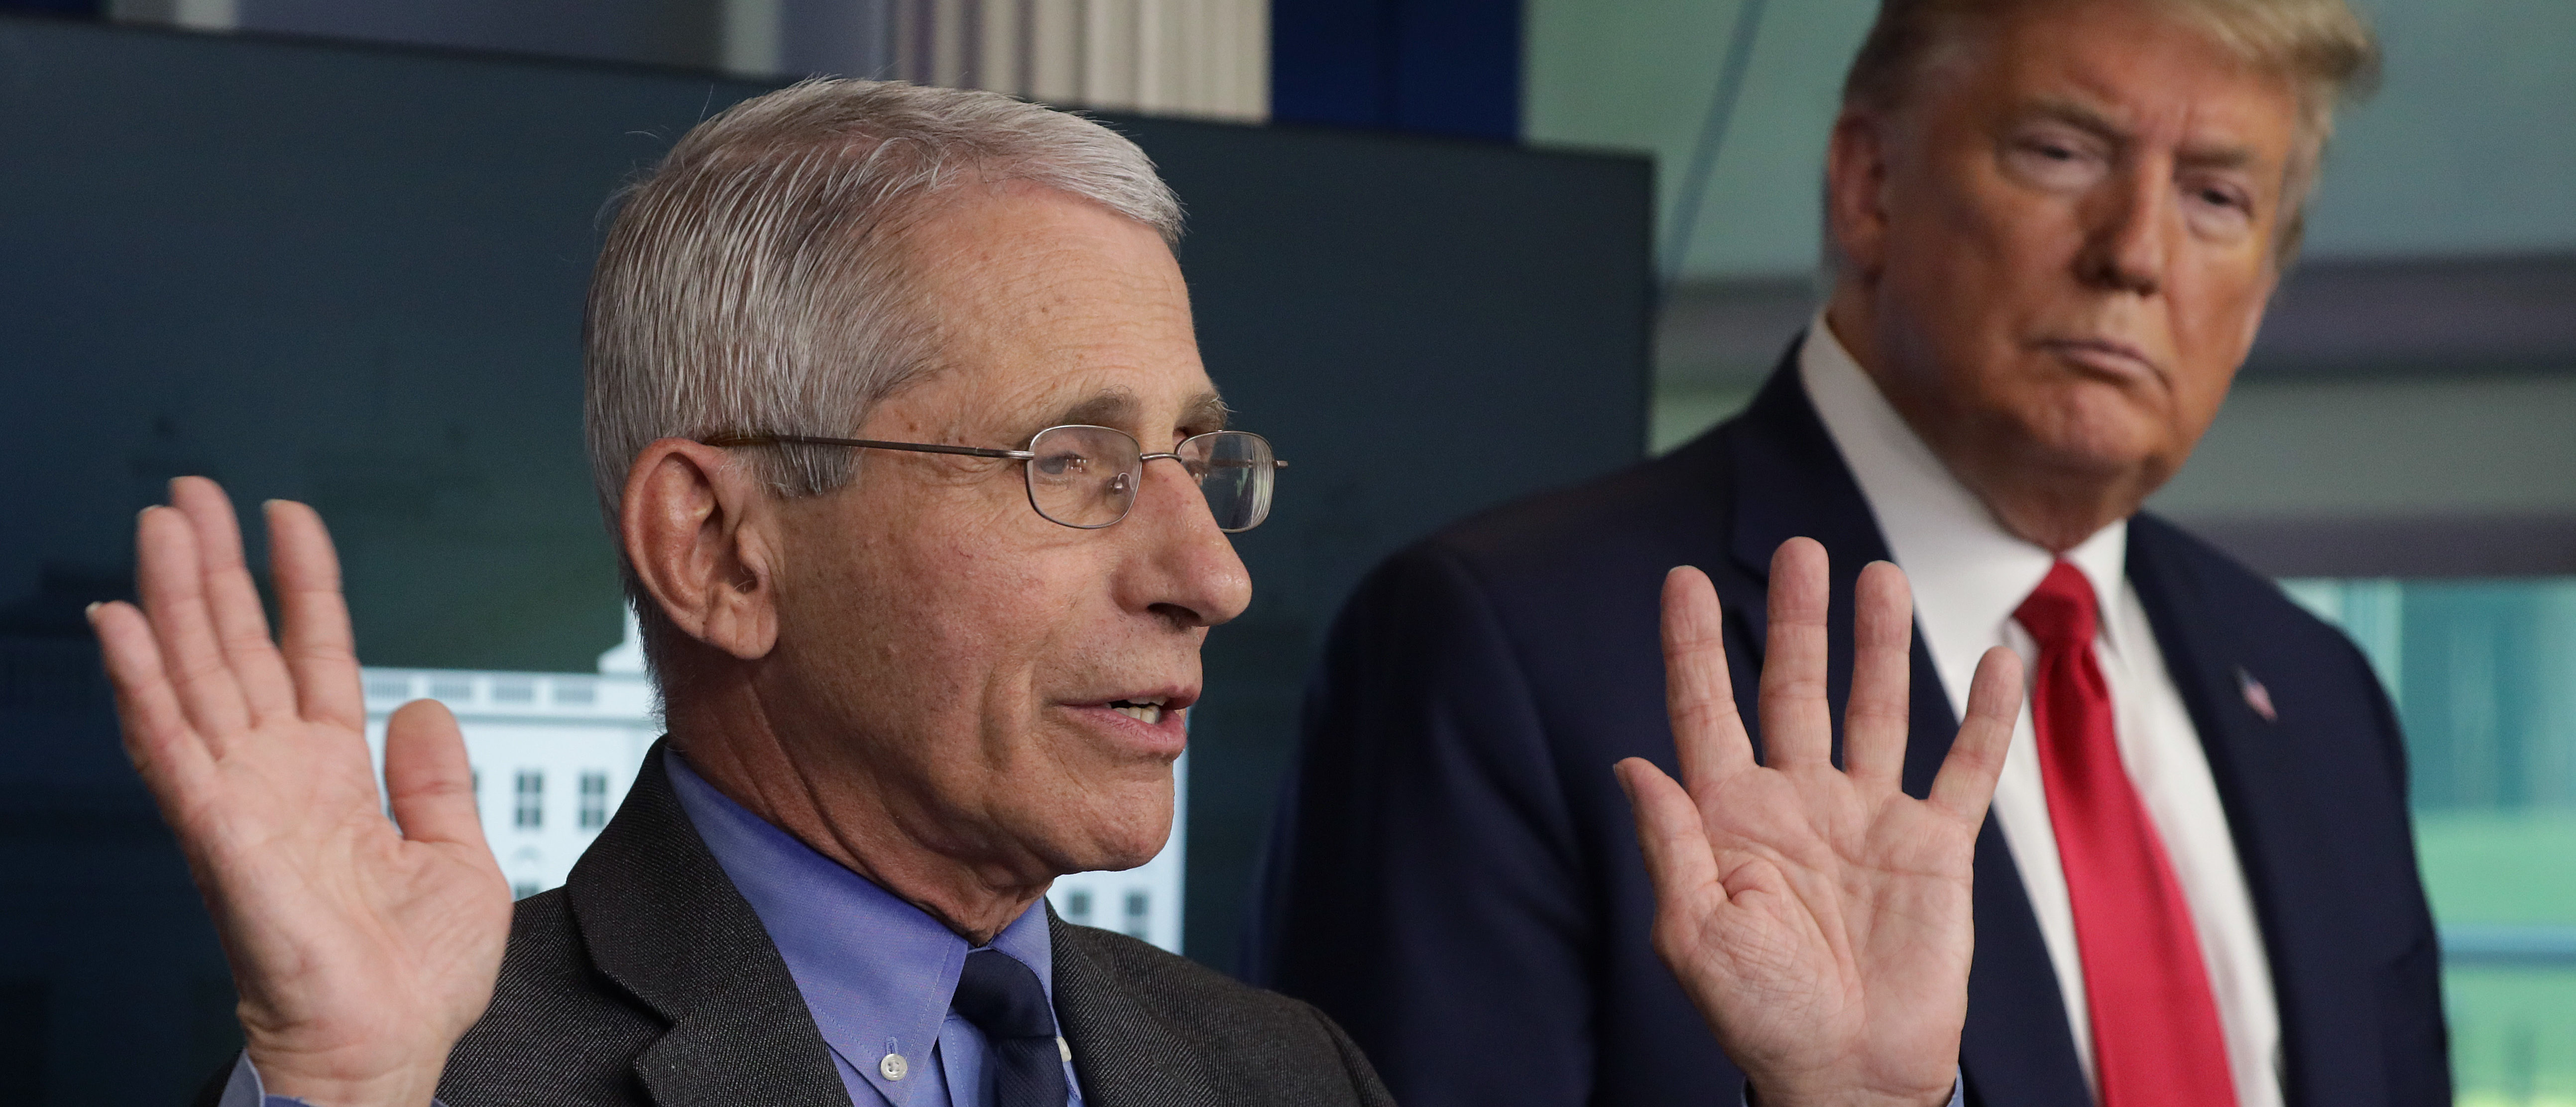 WASHINGTON, DC - APRIL 13: Dr. Anthony Fauci, director of the National Institute of Allergy and Infectious Diseases speaks as President Donald Trump listens during the daily briefing of the White House Coronavirus Task Force at the James Brady Press Briefing Room of the White House April 13, 2020 in Washington, DC. On Monday President Trump tweeted that he will be the one to make the decision to re-open the states in conjunction with the Governors and input from others. (Photo by Alex Wong/Getty Images)